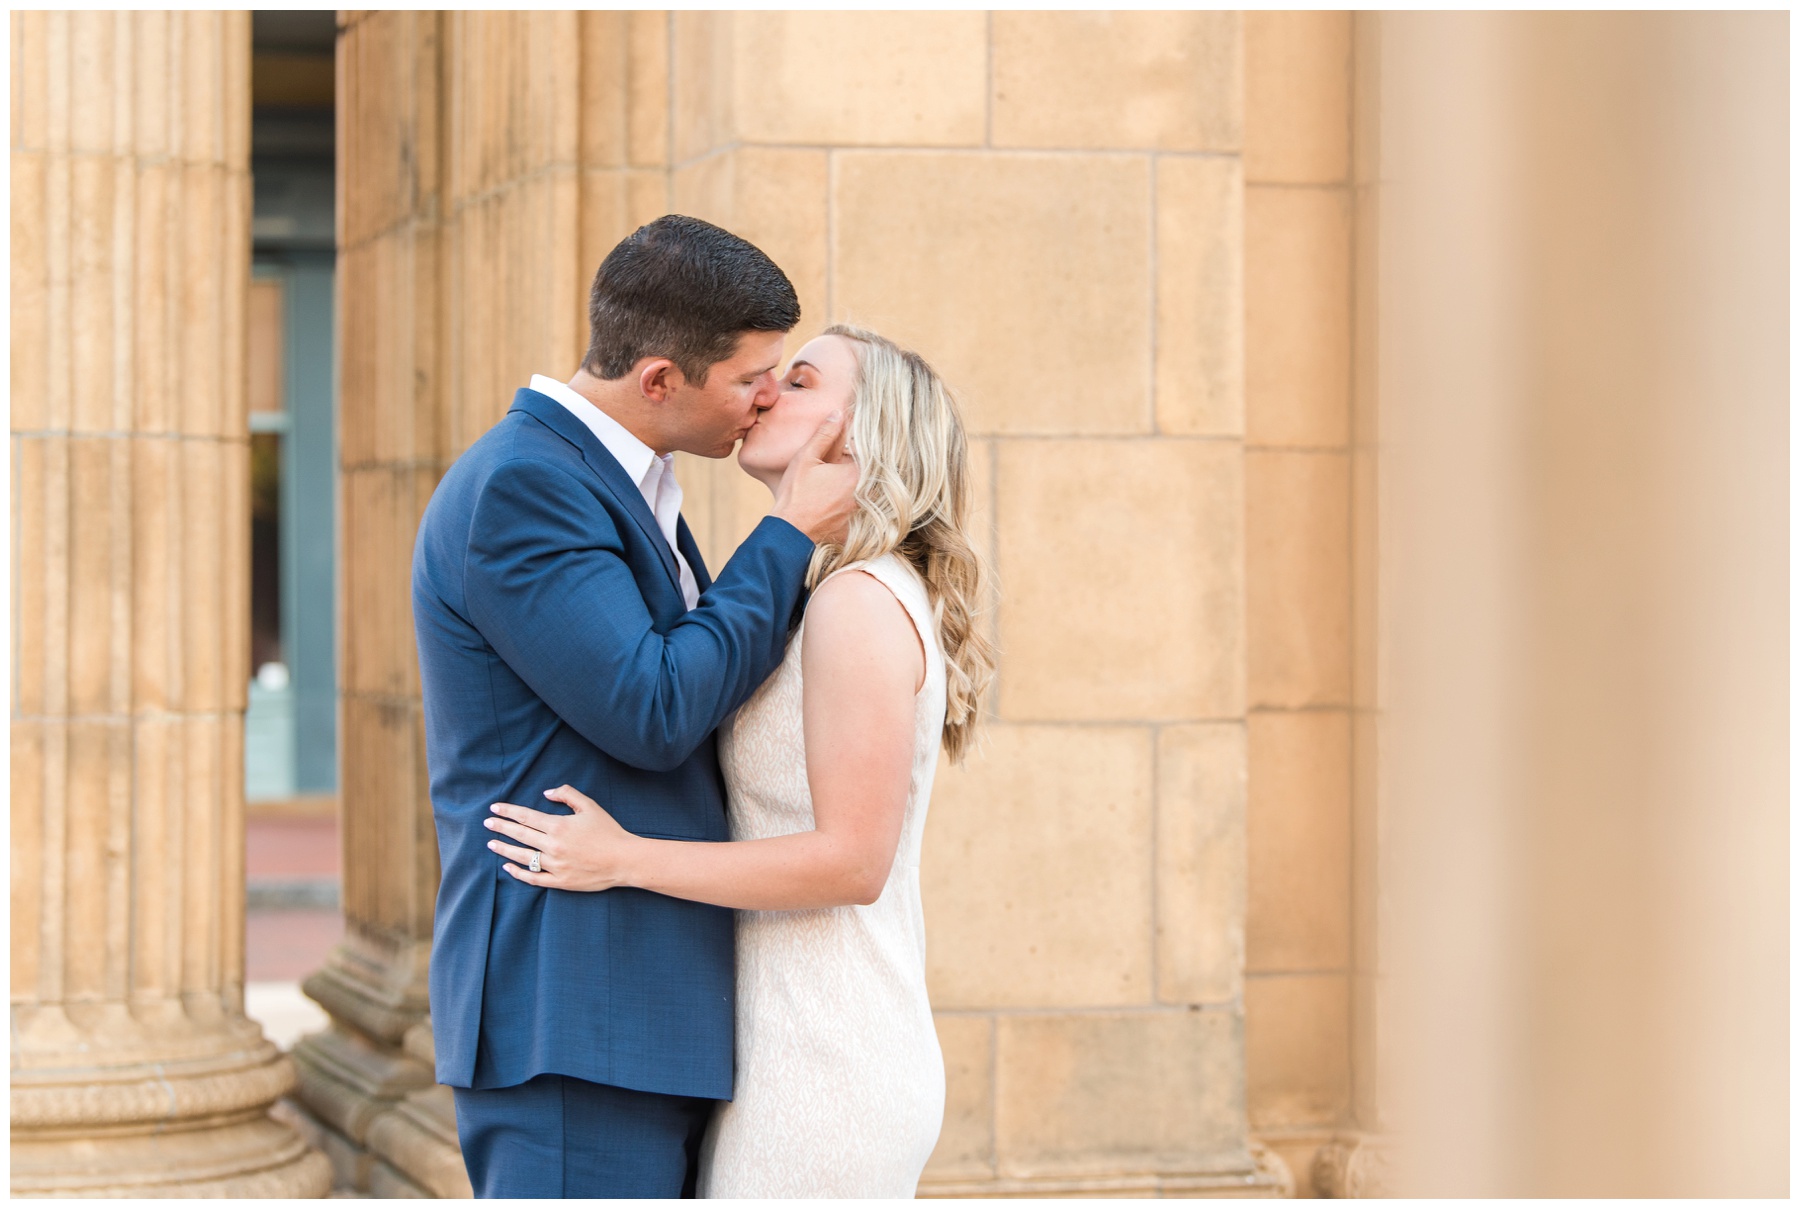 Union Station Arch downtown Columbus Ohio Wedding and Engagement photo